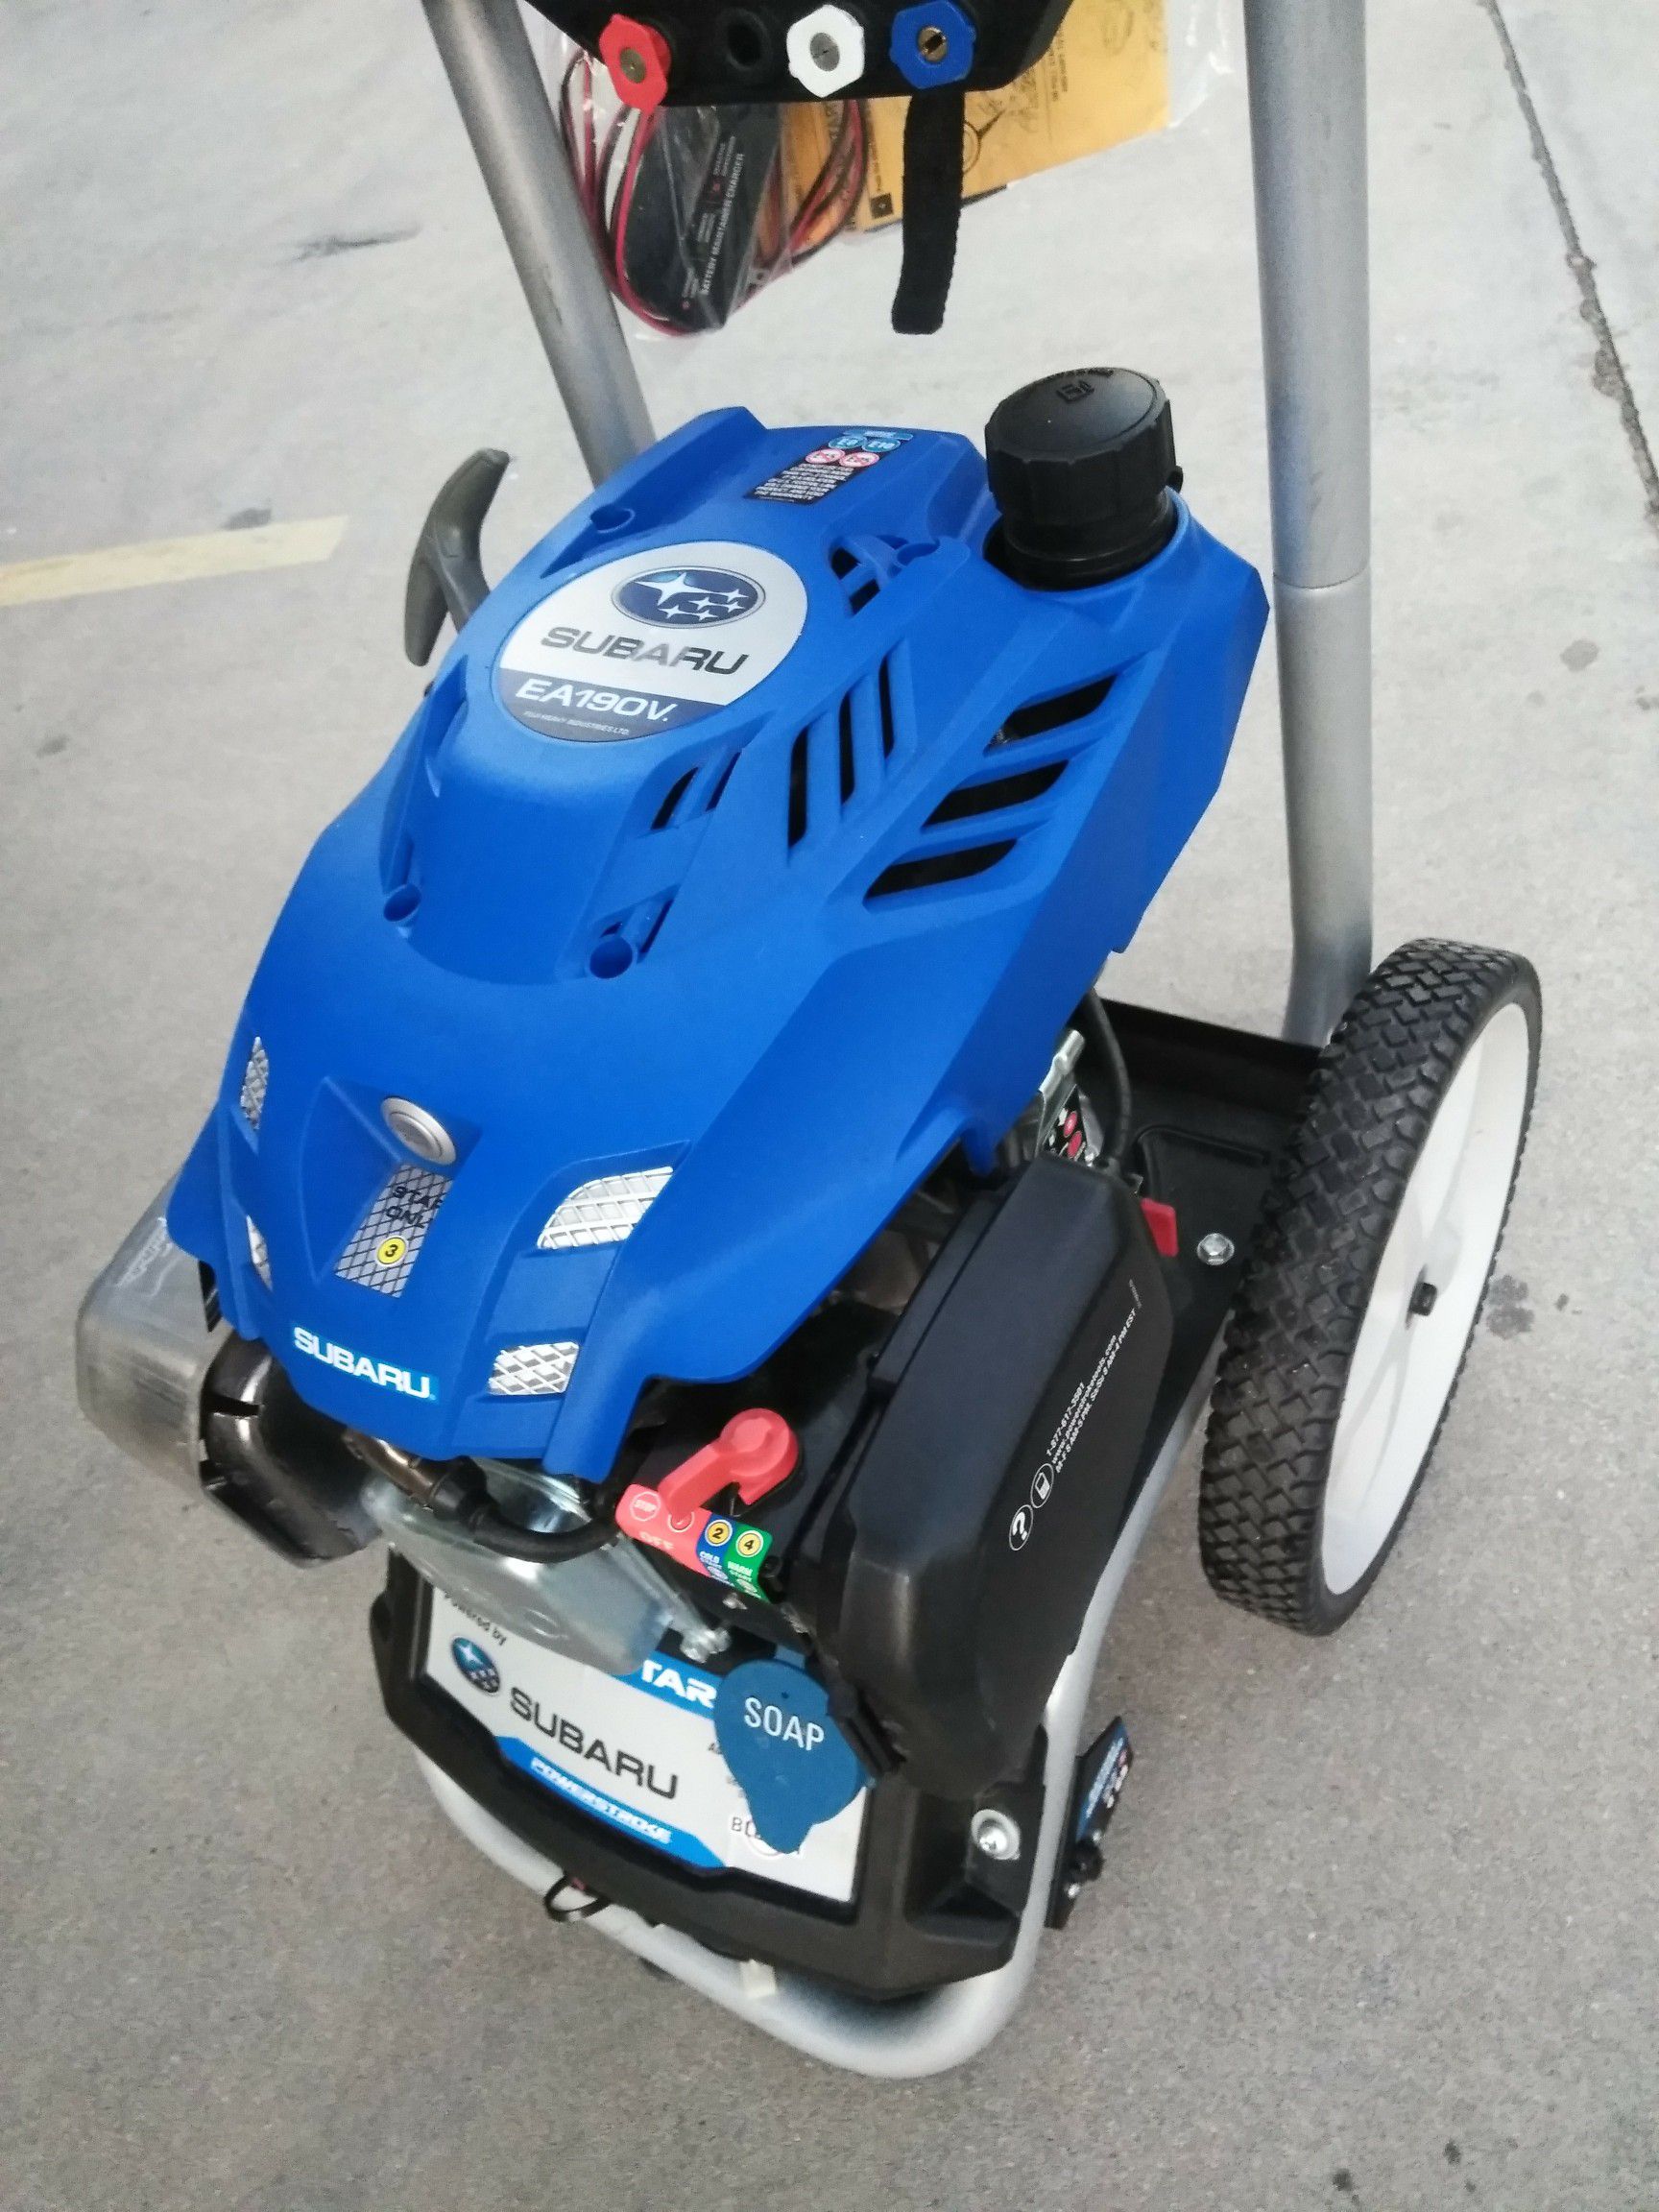 Pressure washer electric start almost new